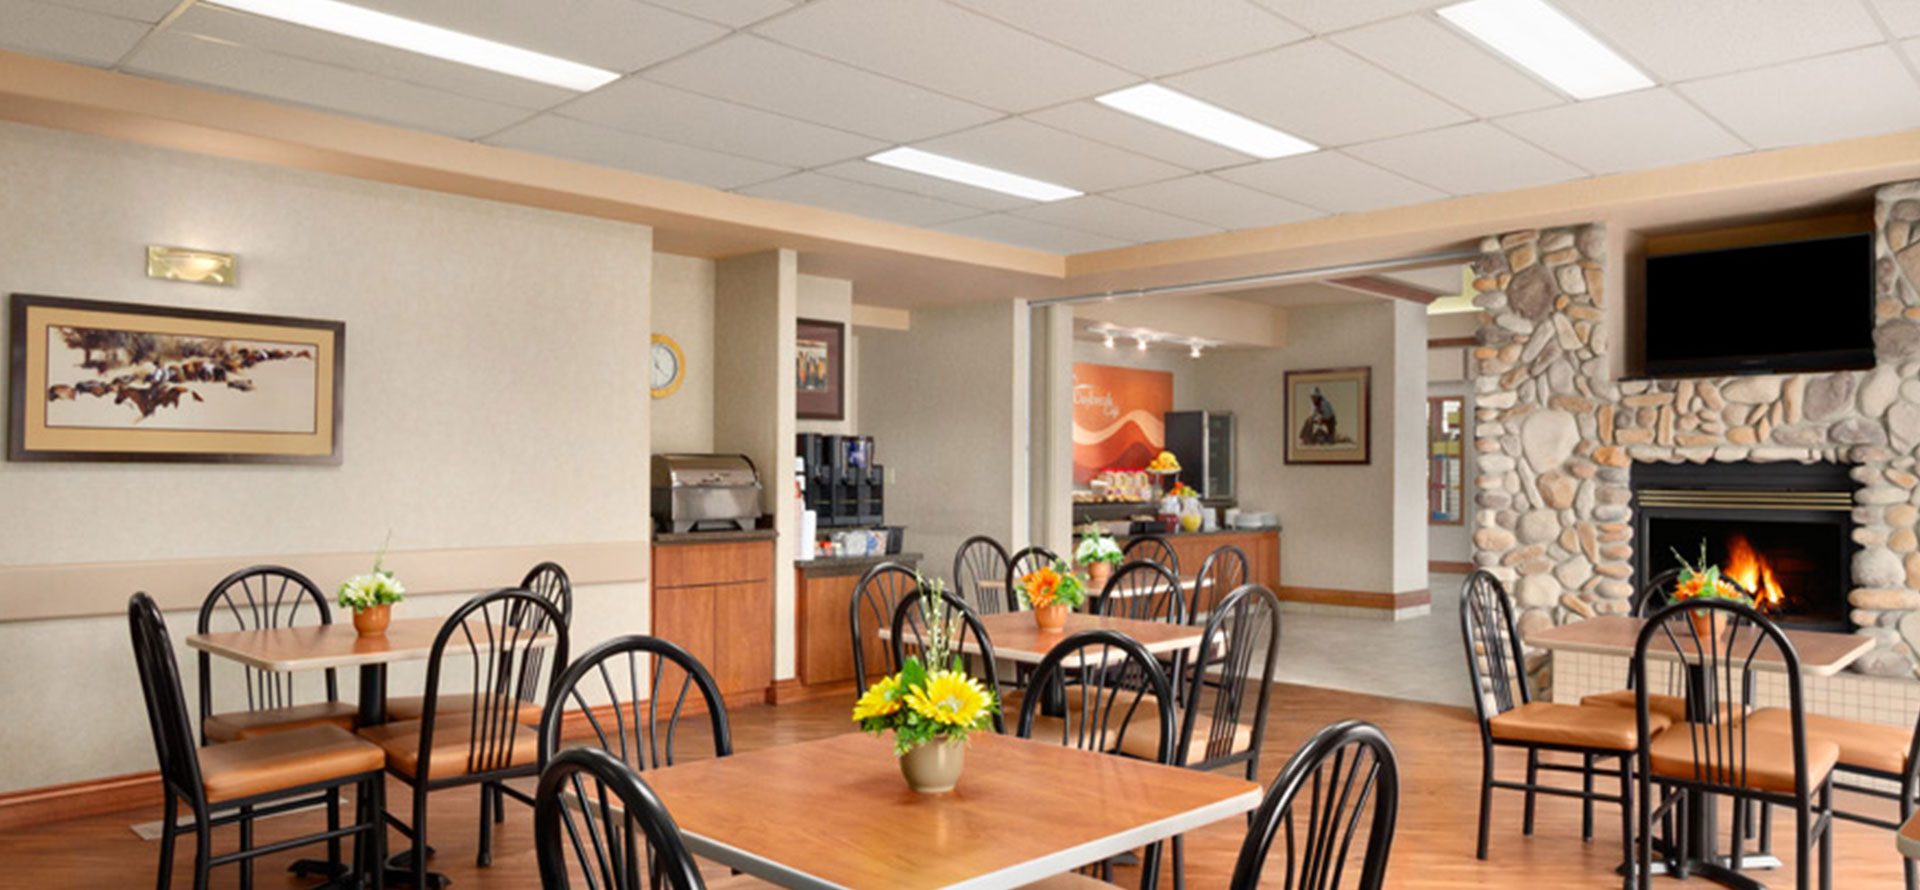 Large view of a bright breakfast room with stone fireplace, tables, chairs and fresh flowers at Days Inn Red Deer, Alberta.
